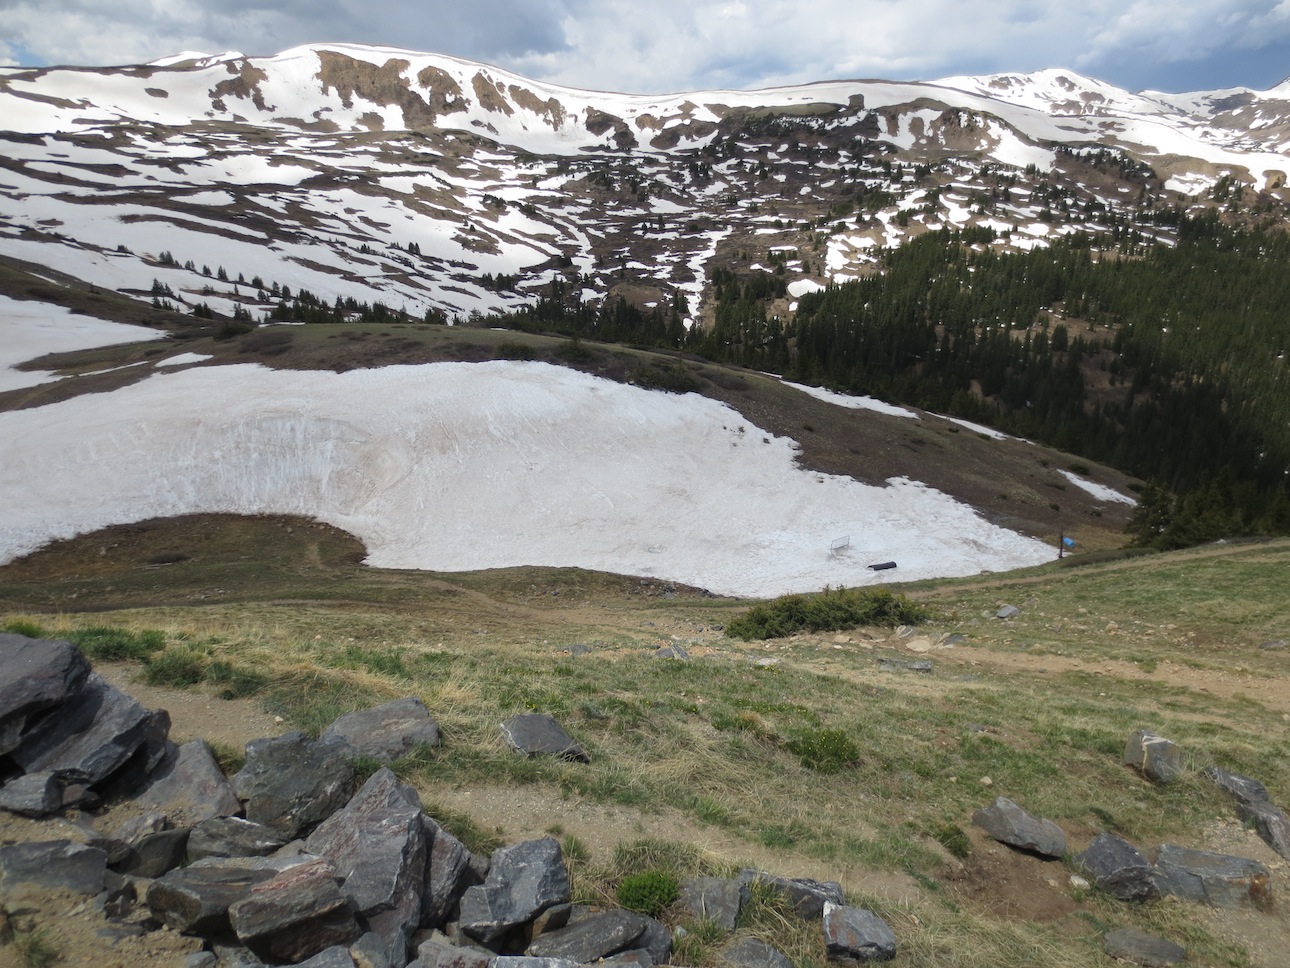 Looking down from Loveland Pass.